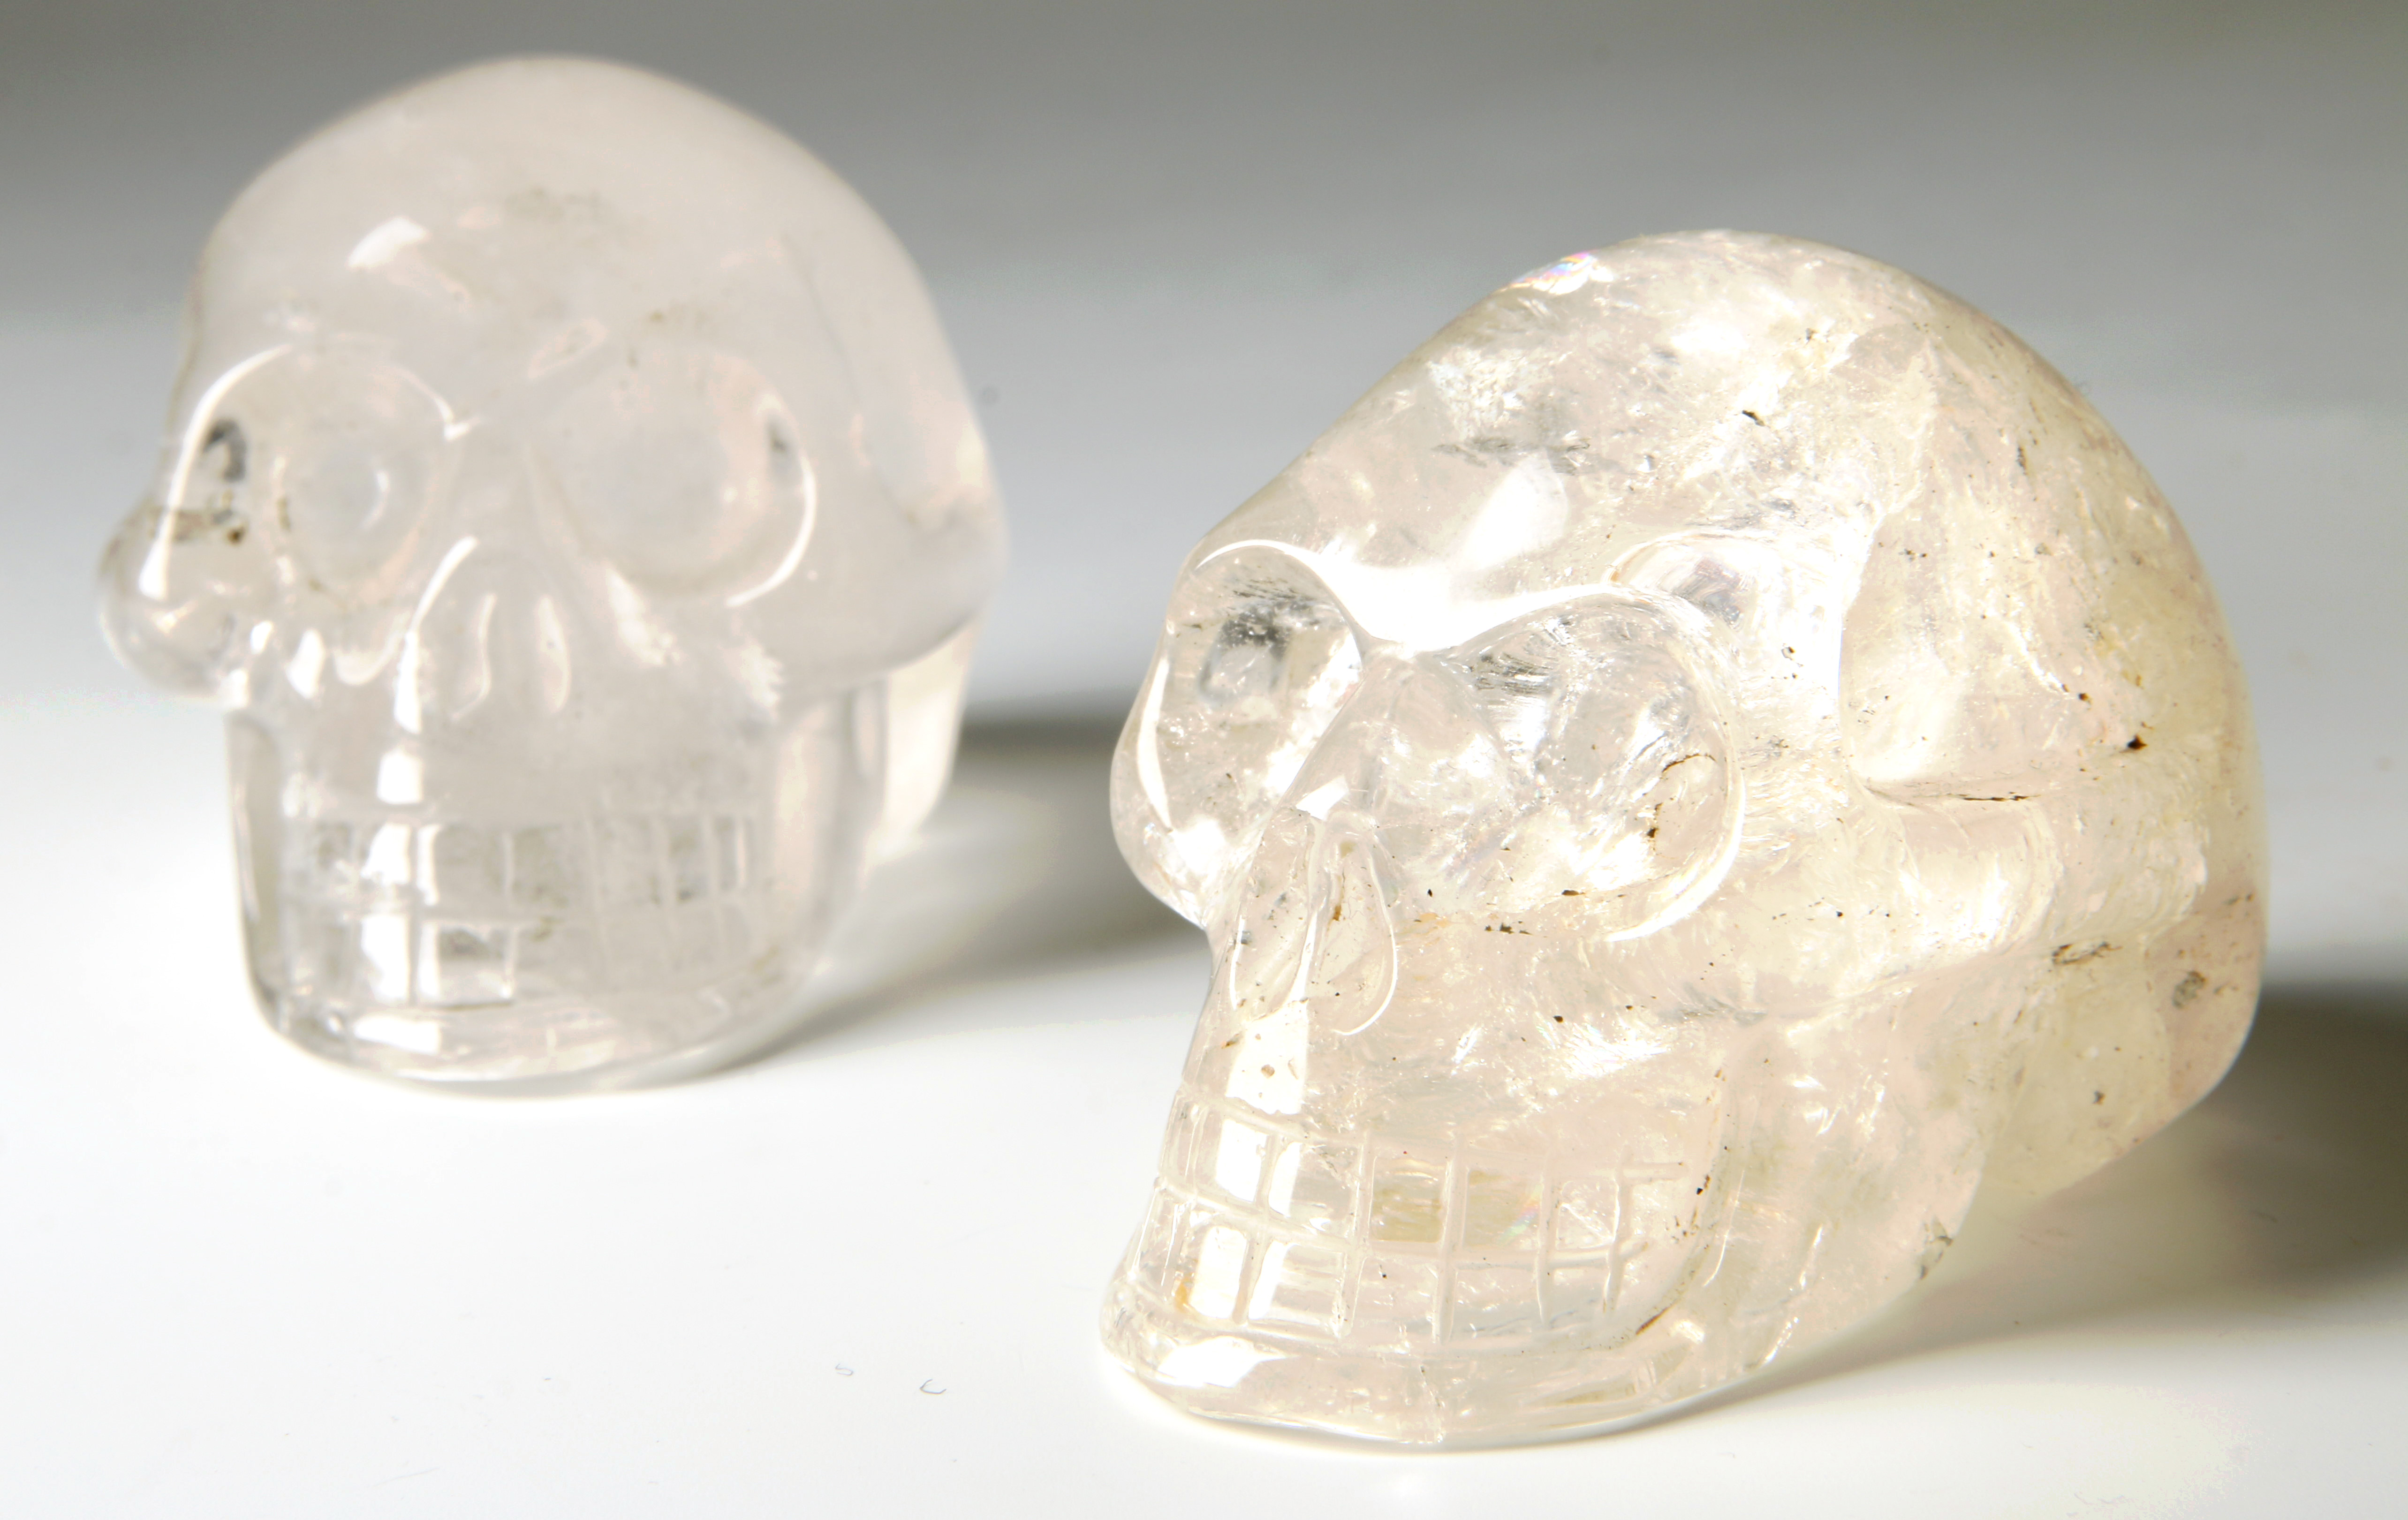 TWO ROCK CRYSTAL SKULL FORM CARVINGS